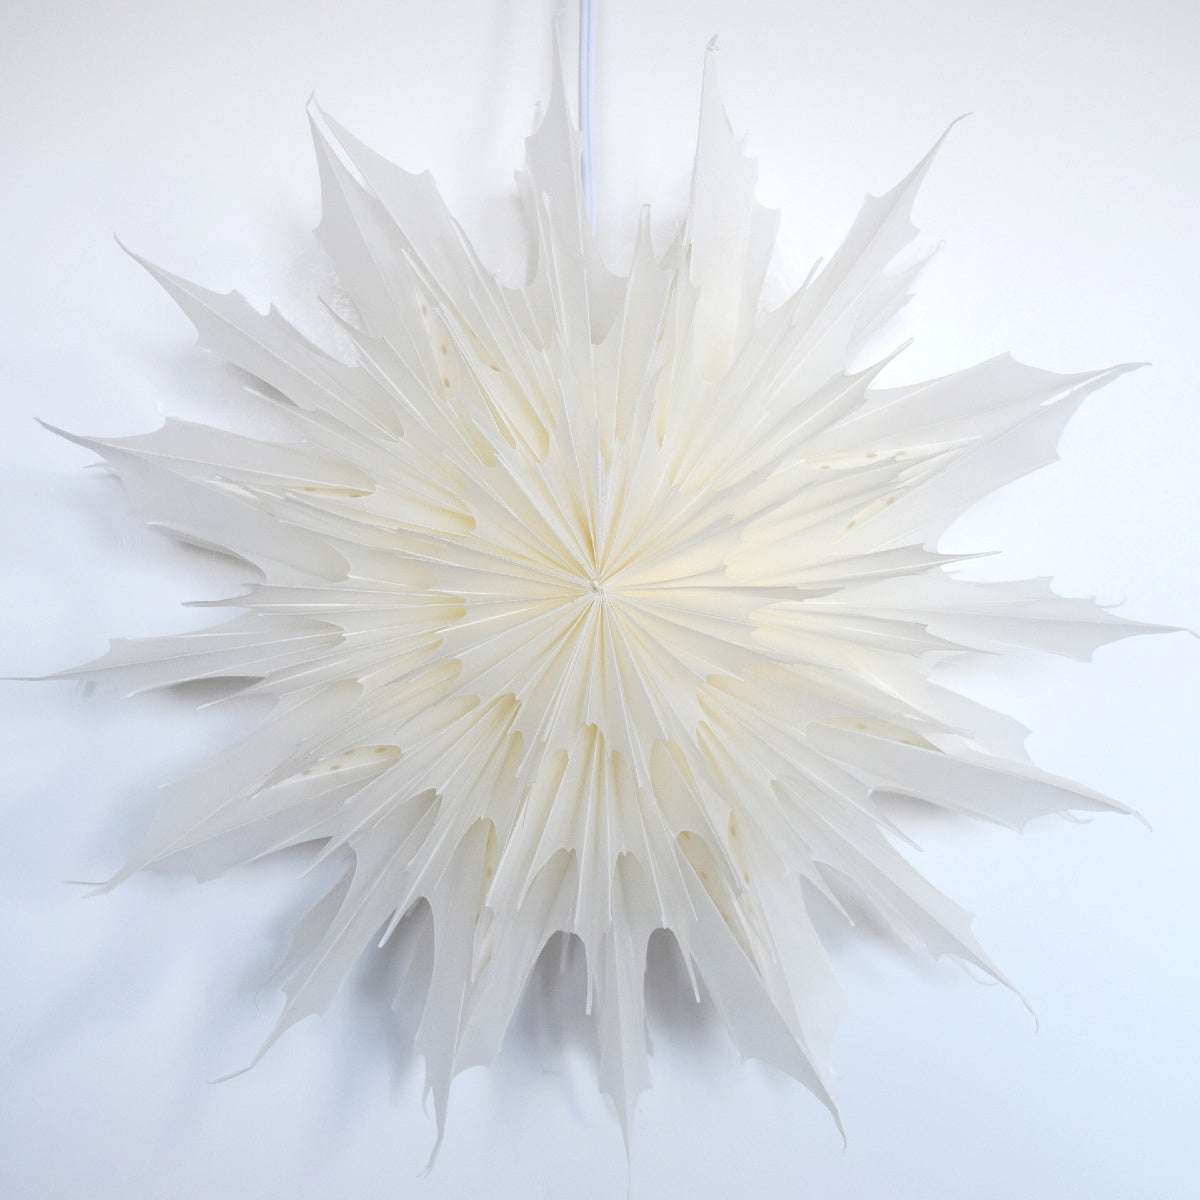 17&quot; White Sleet Snowflake Star Lantern Pizzelle Design - Great With or Without Lights - Ideal for Holiday and Snowflake Decorations, Weddings, Parties, and Home Deco